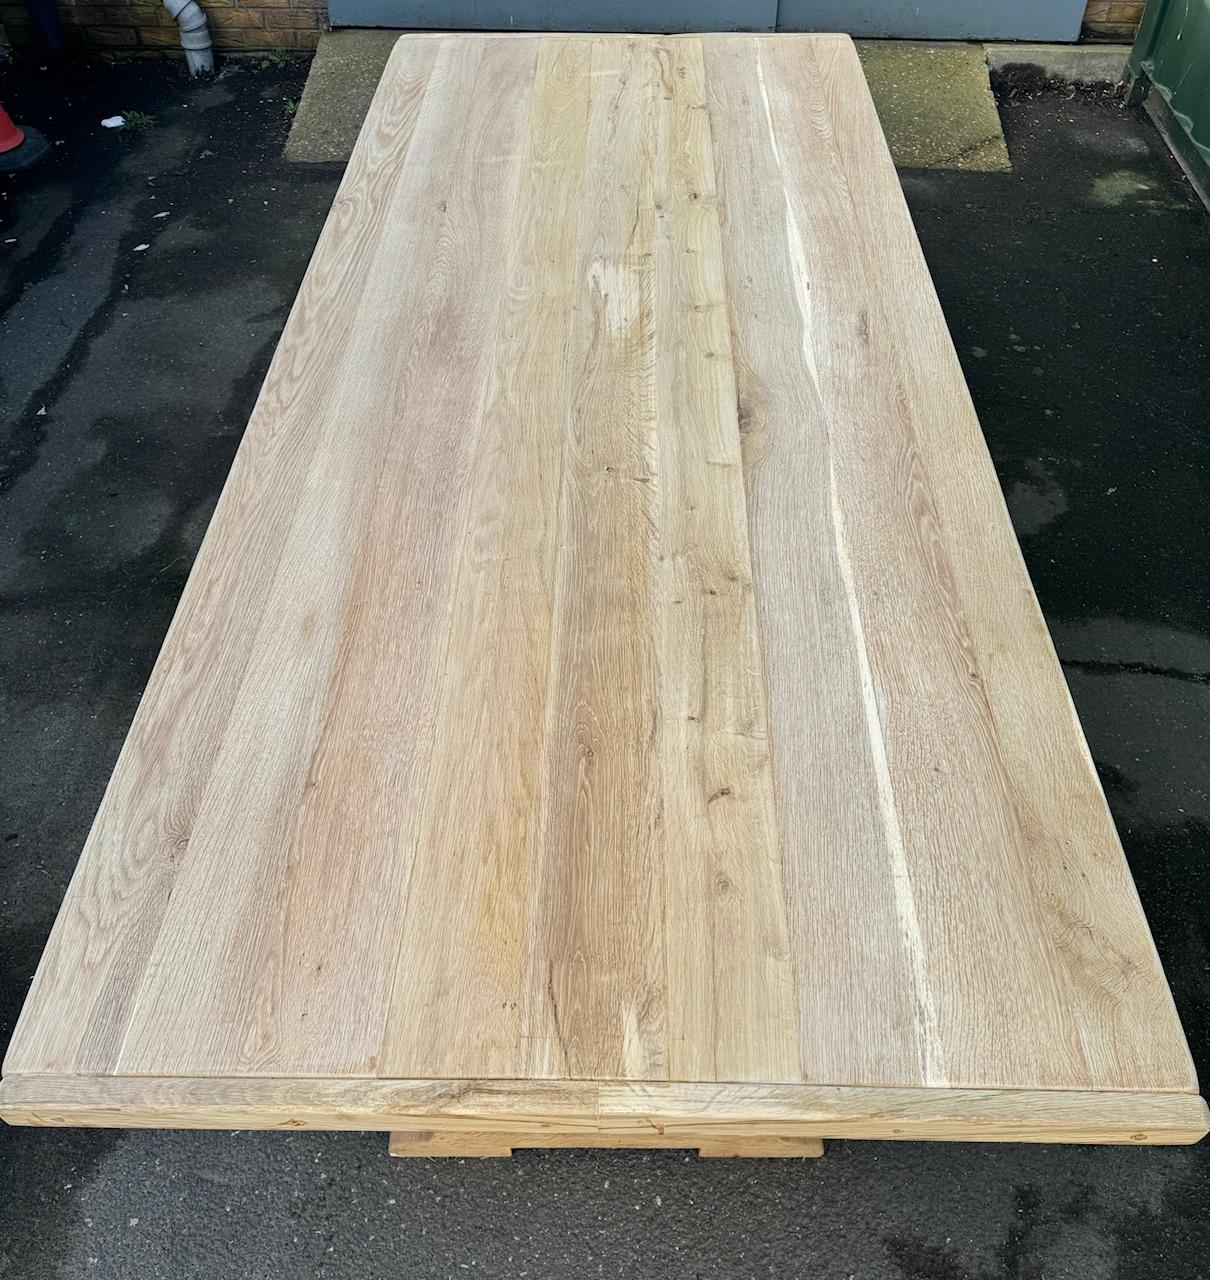 An Incredible Solid Oak Farmhouse Dining Table, both long at over 3 Meters and very rarely Deep also at 1.25 Meters. Sitting on a triple base which is also rare and a nice feature. French in origin and dating to the early 1920s, of very good quality